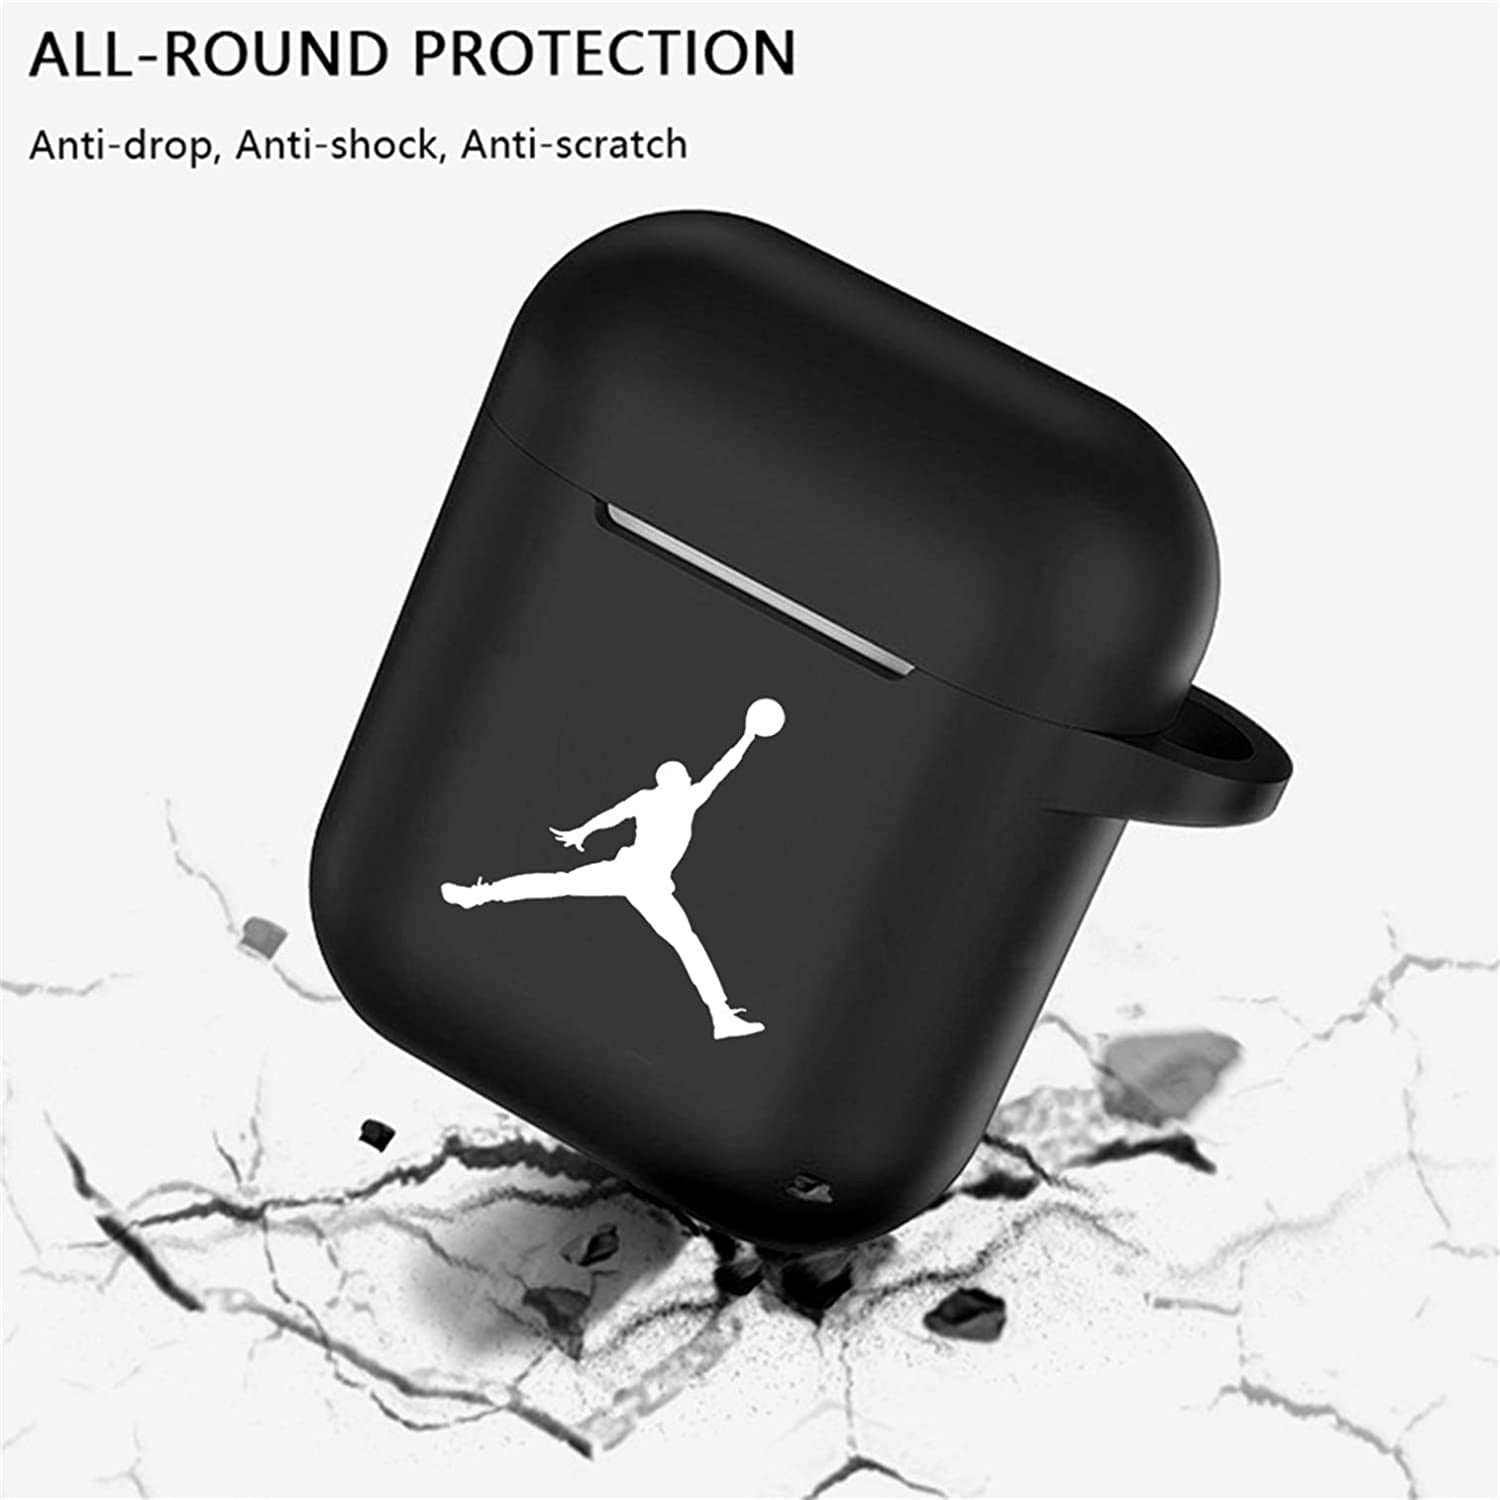 3D Luxury Fashion Sport Style Character Silicone Airpod Cover Stylish Designer Cases for Girls Kids Teens Boys Air pods Black Right Fun Cool Keychain Design Skin Mulafnxal for Airpods 1&2 Case